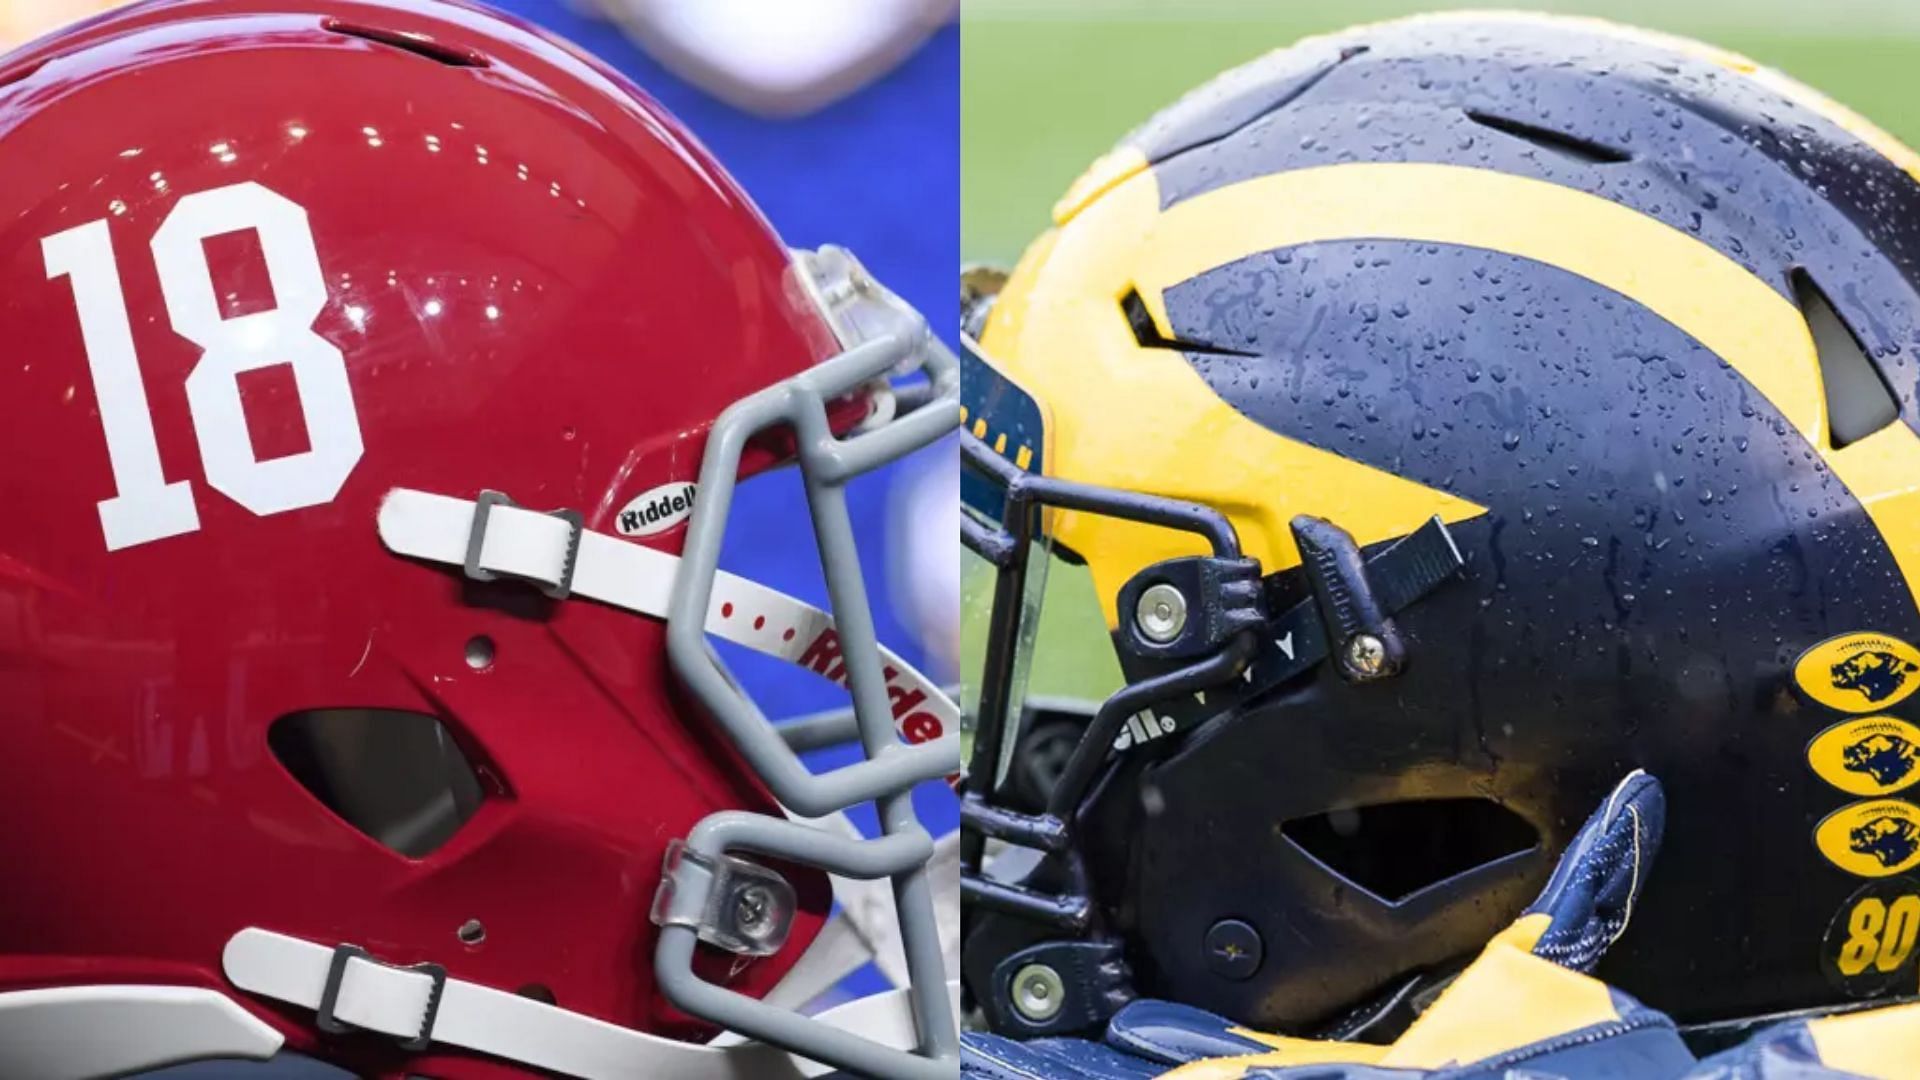 The Michigan Wolverines will face the Alabama Crimson Tide in the 2024 Rose Bowl. (Image credit: mgoblue.com, Getty Images)